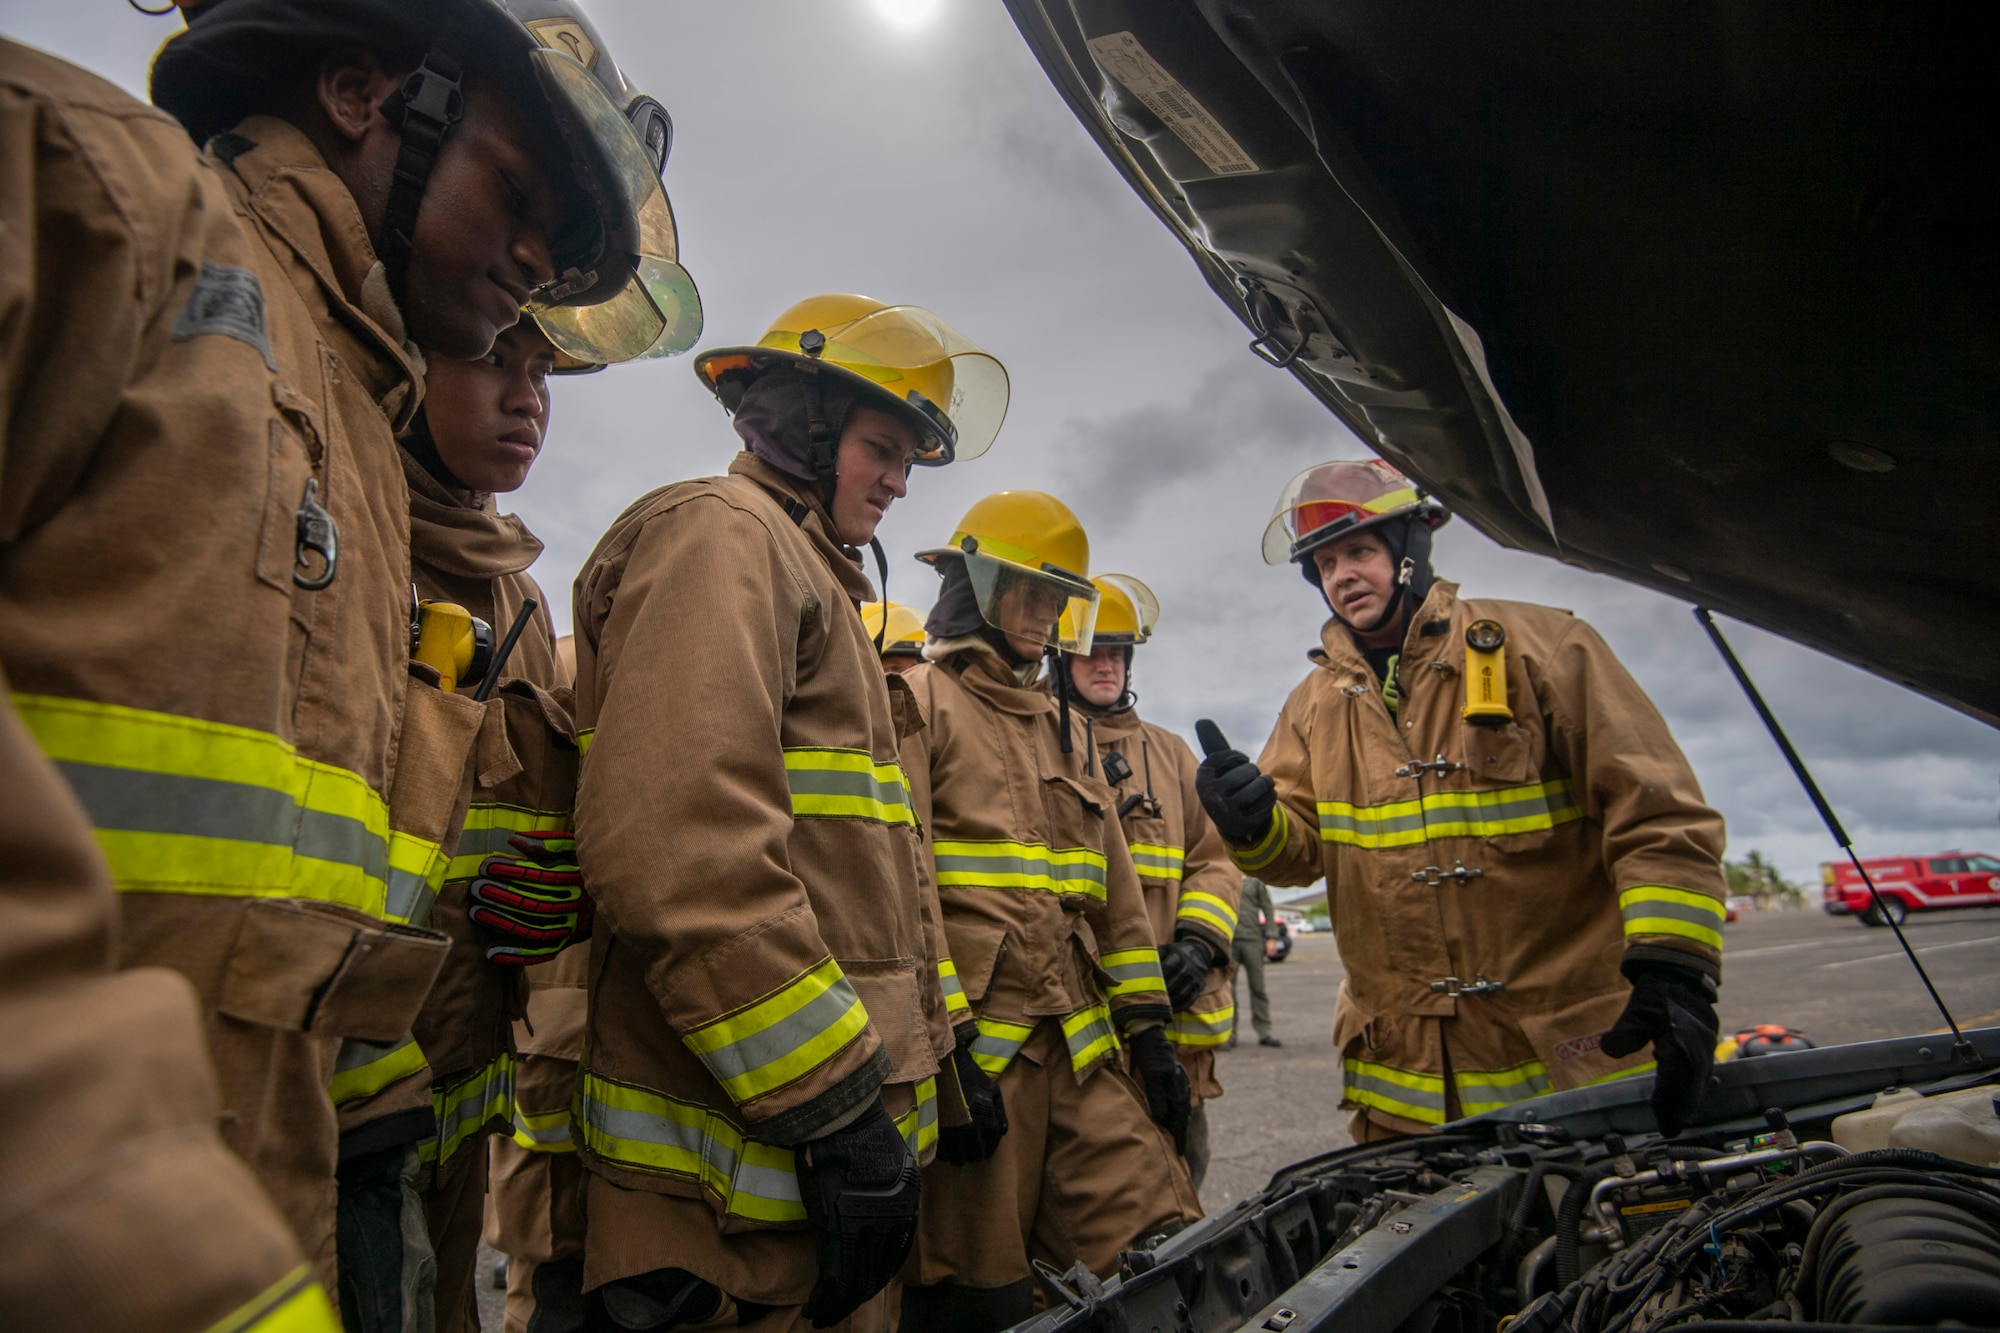 Overlooking a car engine, military members from the Air Force and Marines receive instruction on vehicle extrication wearing appropriate fire retardant PPE.